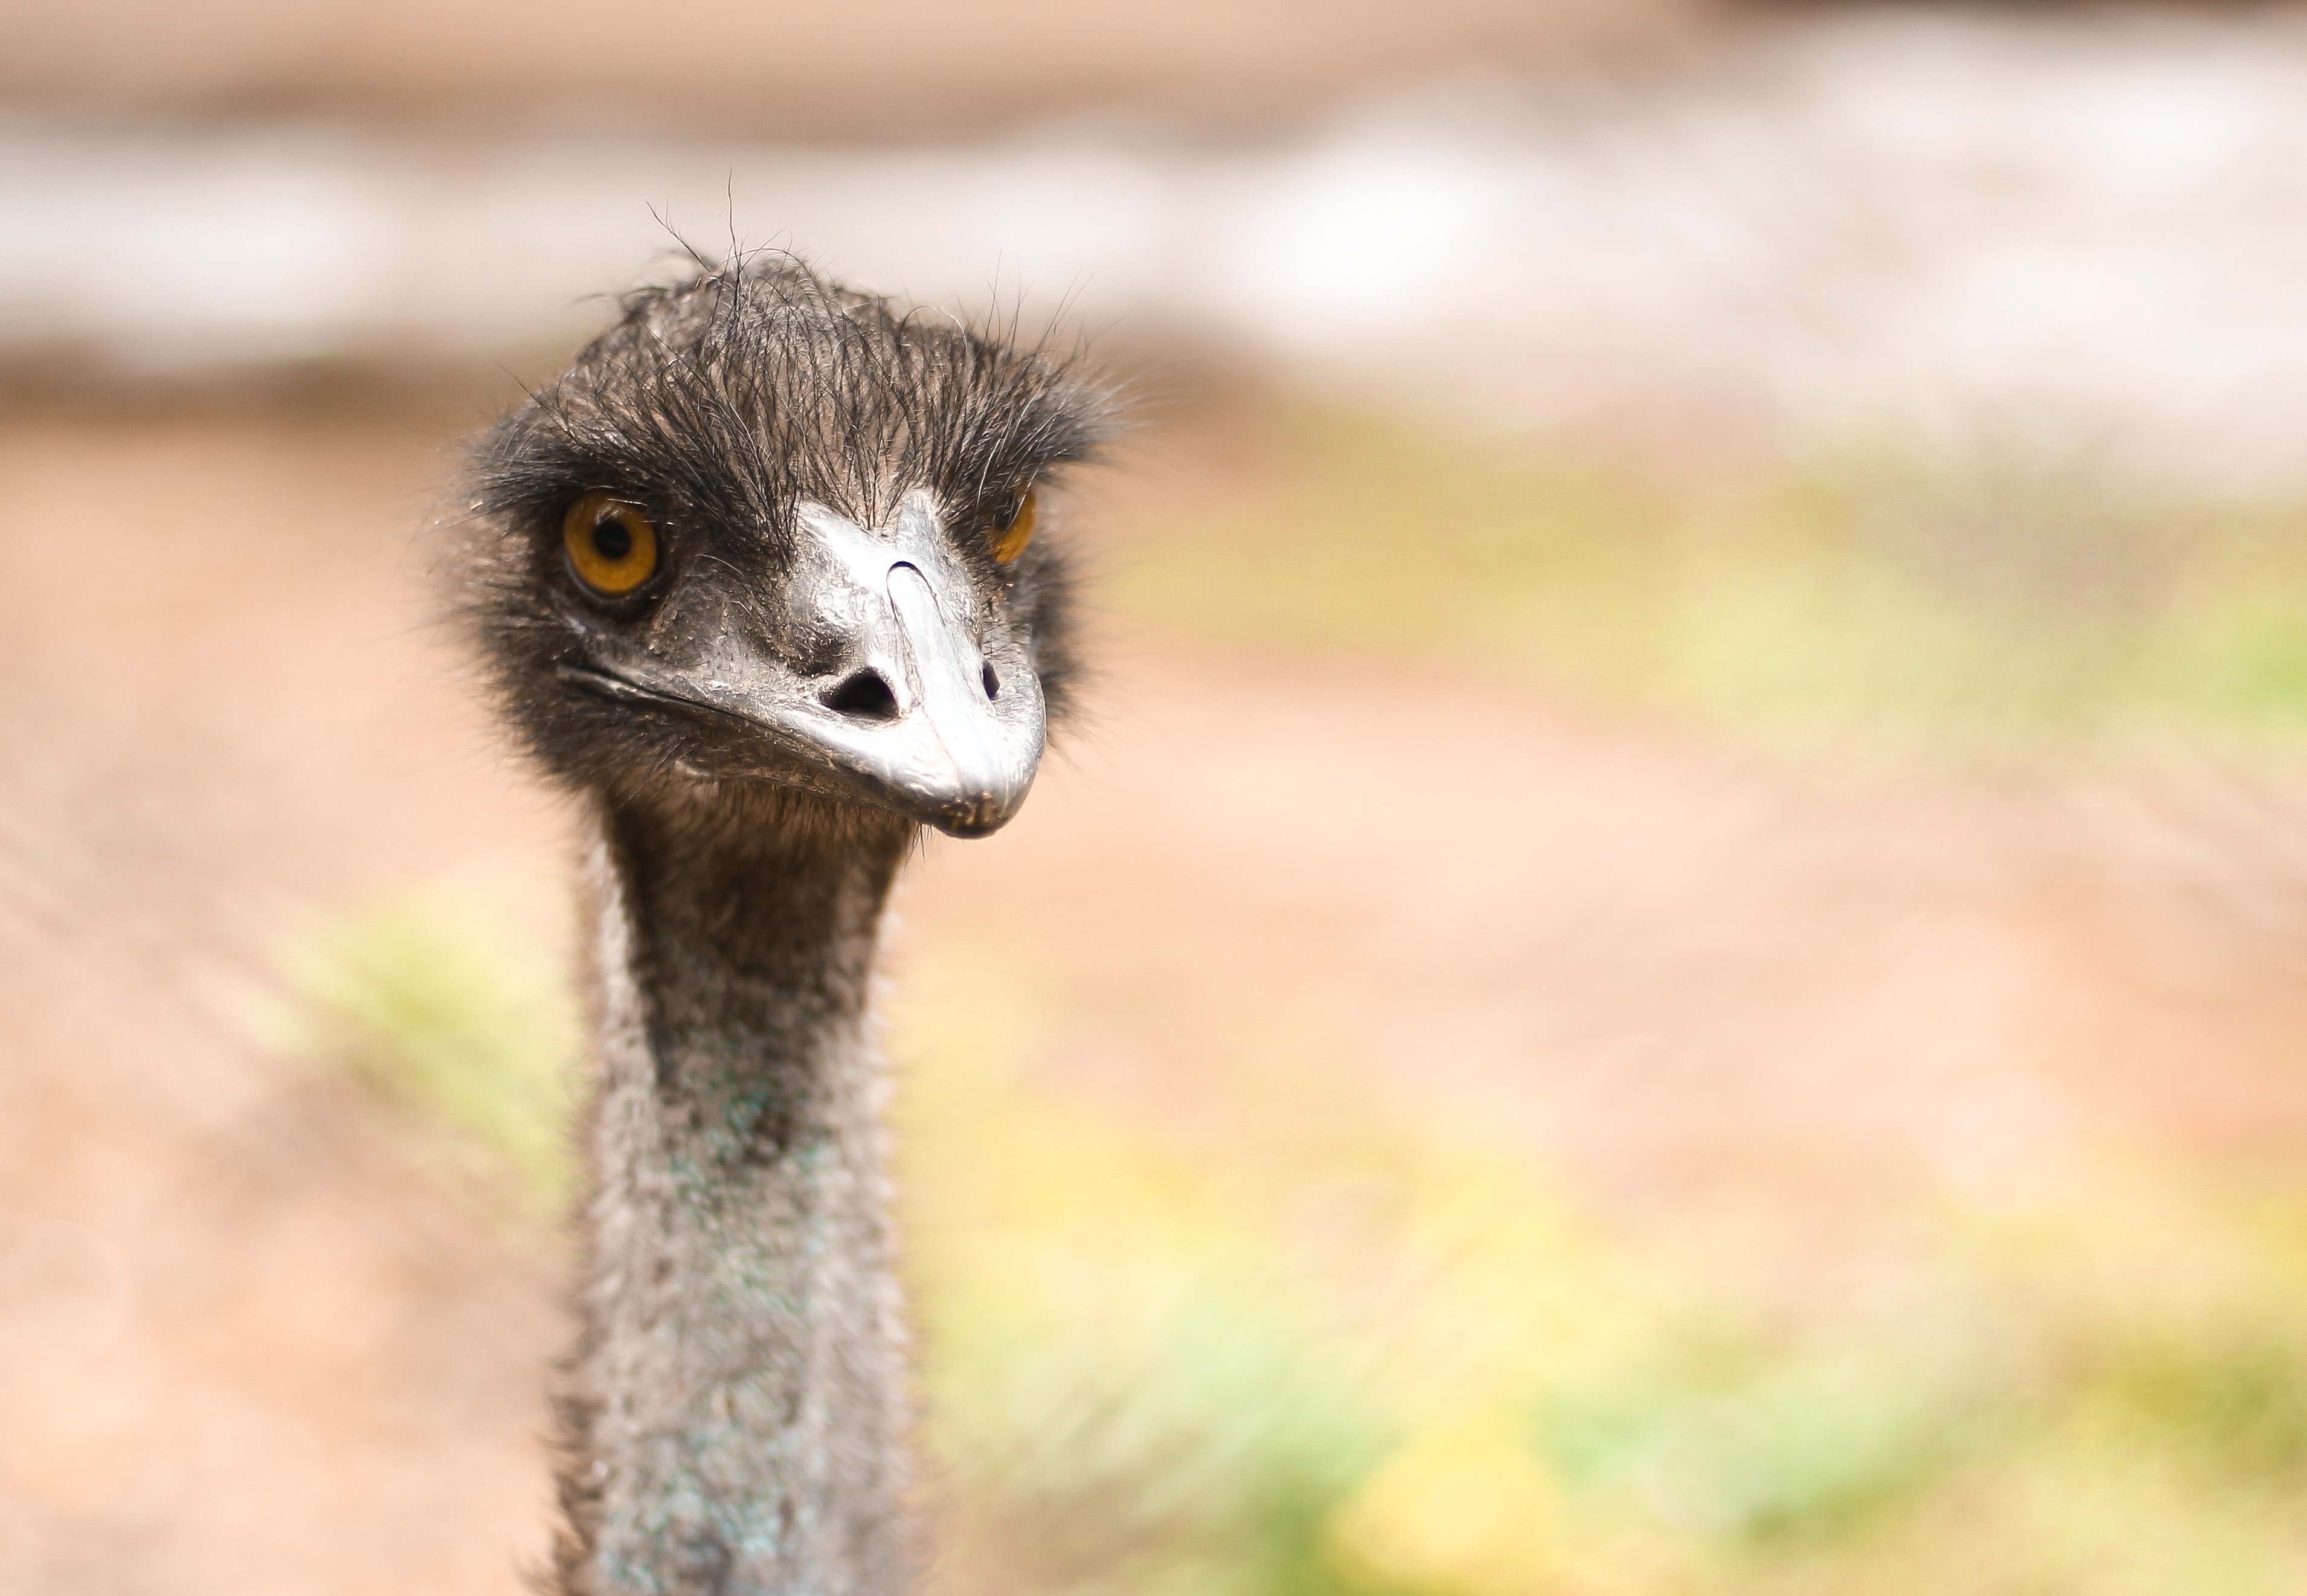 Ostriches can’t fly. To add insult to injury, they’re one of the largest bird species out there. They have to hobble around looking for something to do while their avian counterparts swoop into the air in boundless directions.